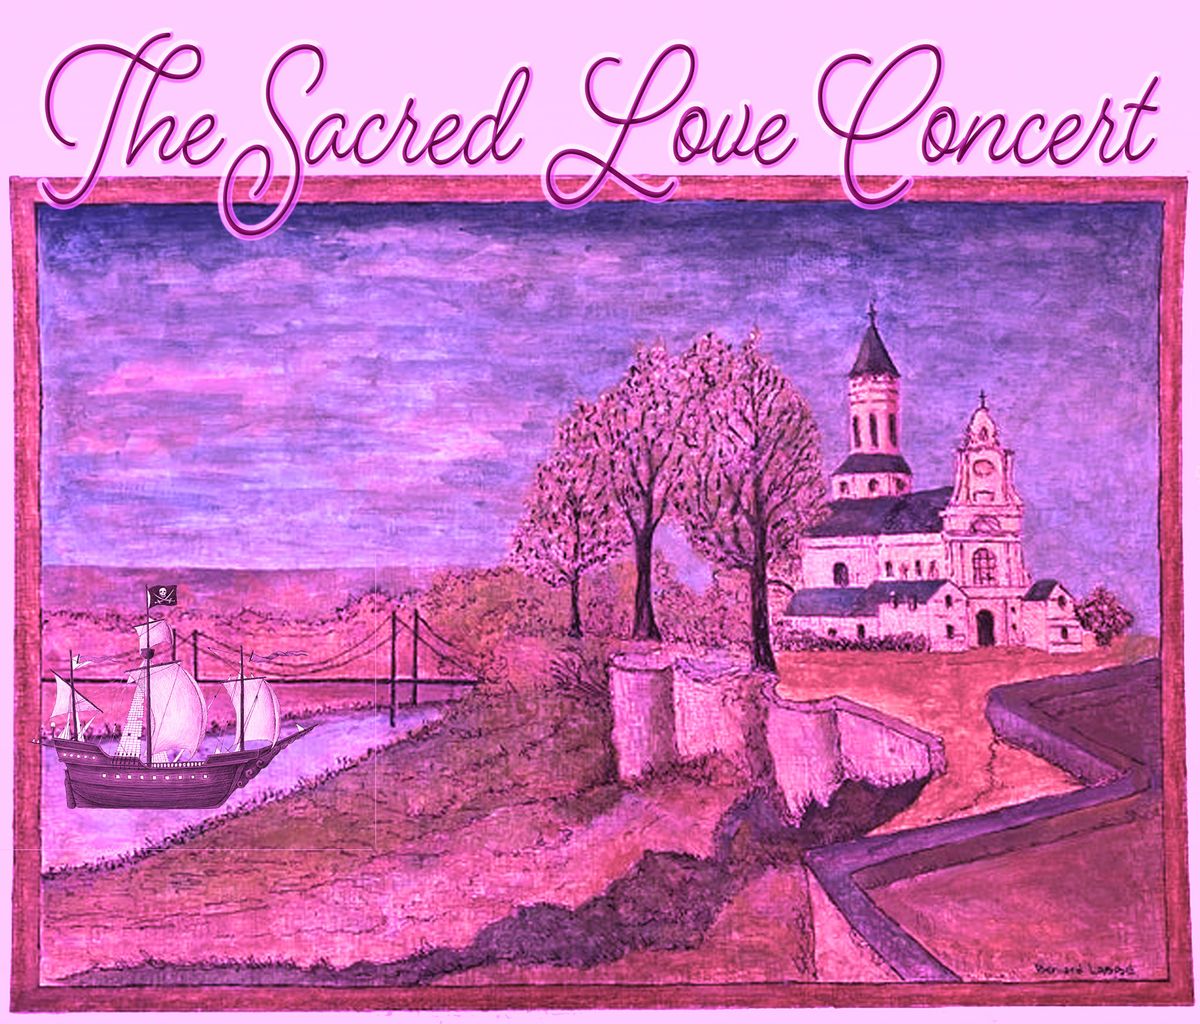 The Sacred Love Concert